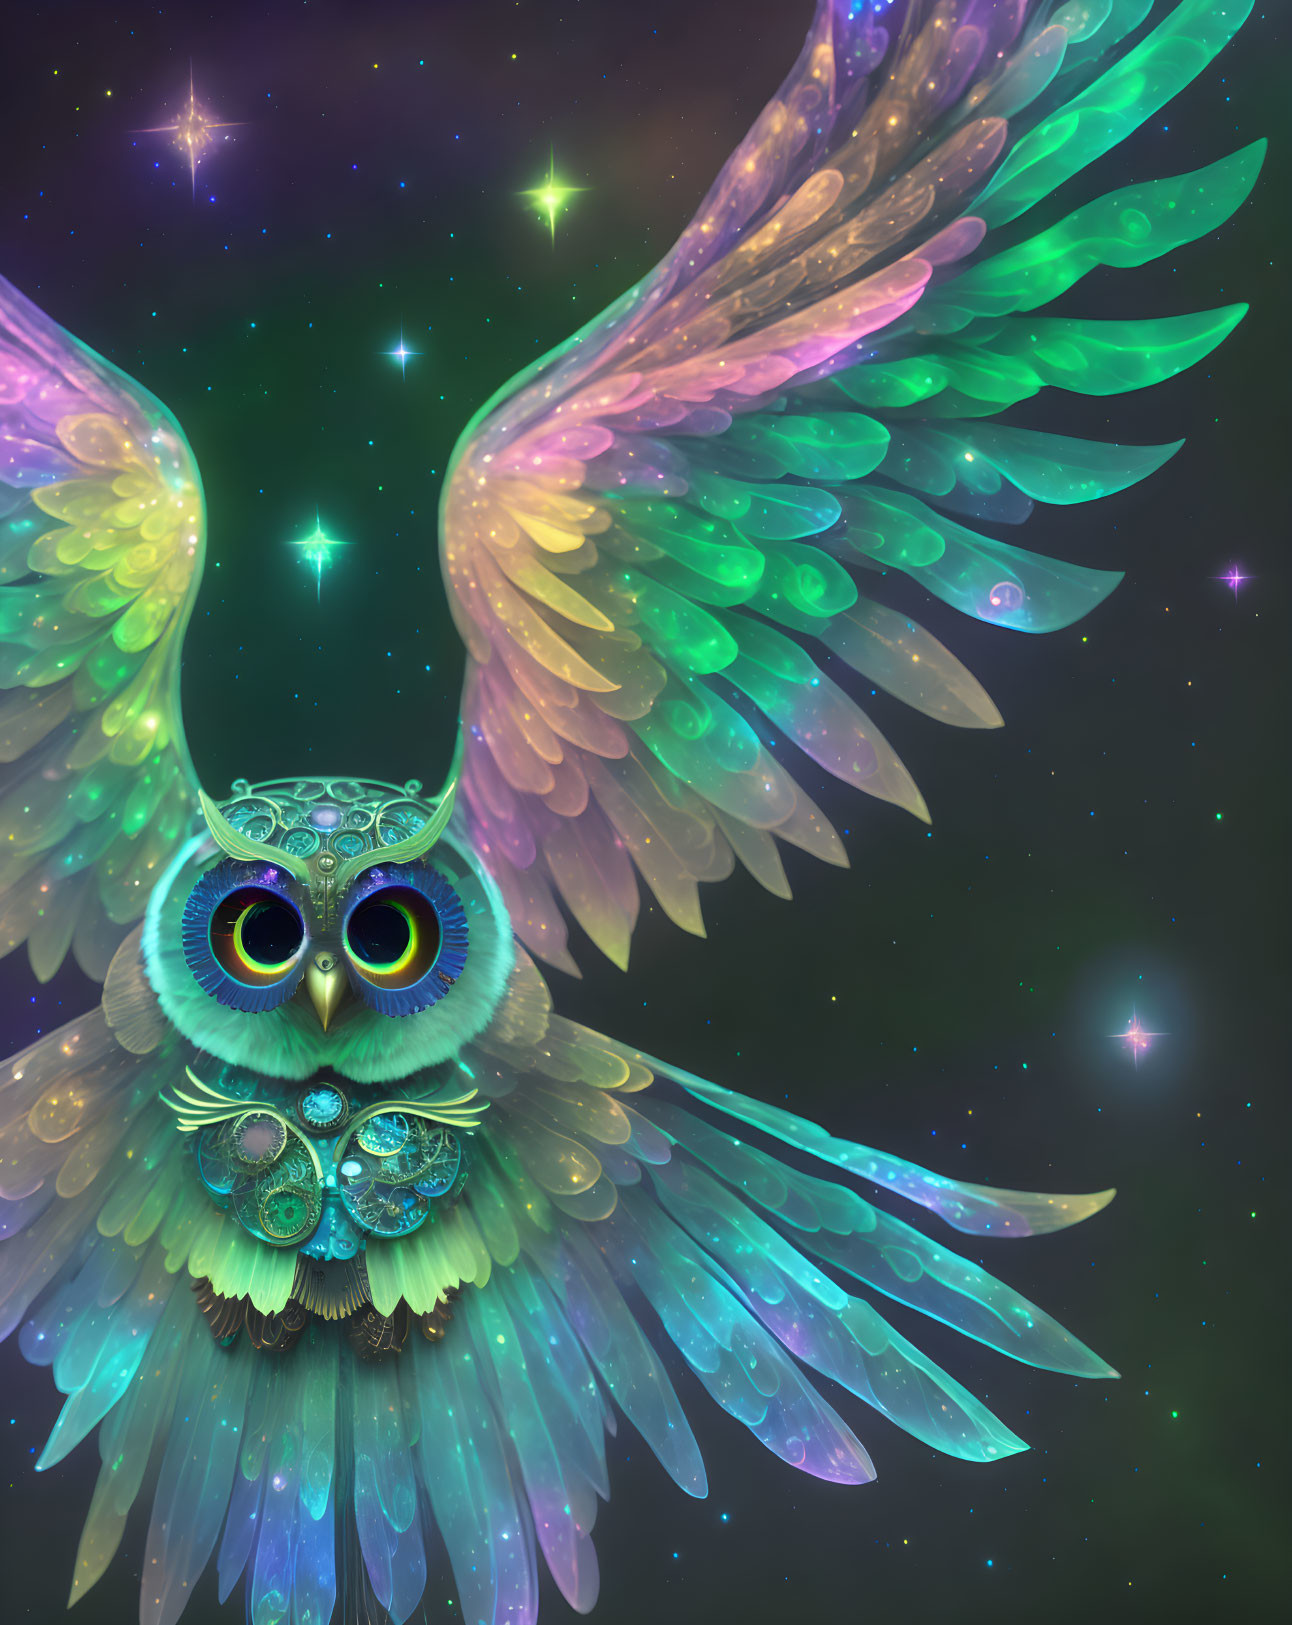 Vibrant cosmic owl with iridescent wings in starry galaxy setting